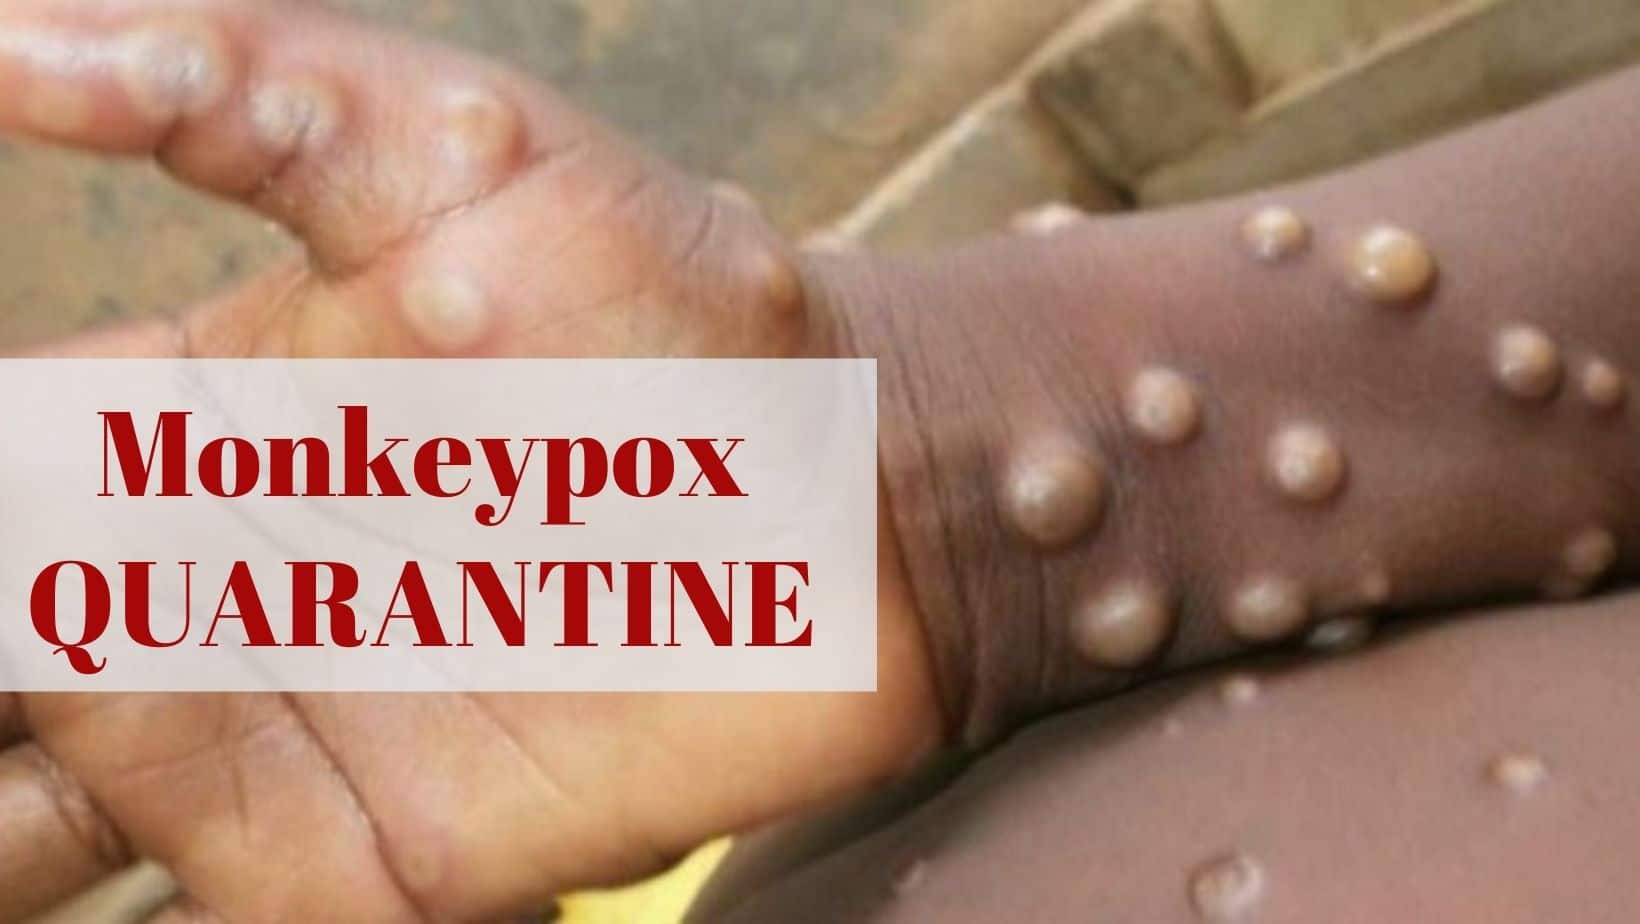 Belgium Becomes First Country To Introduce Monkeypox Quarantine As Virus Spreads To 12 Countries